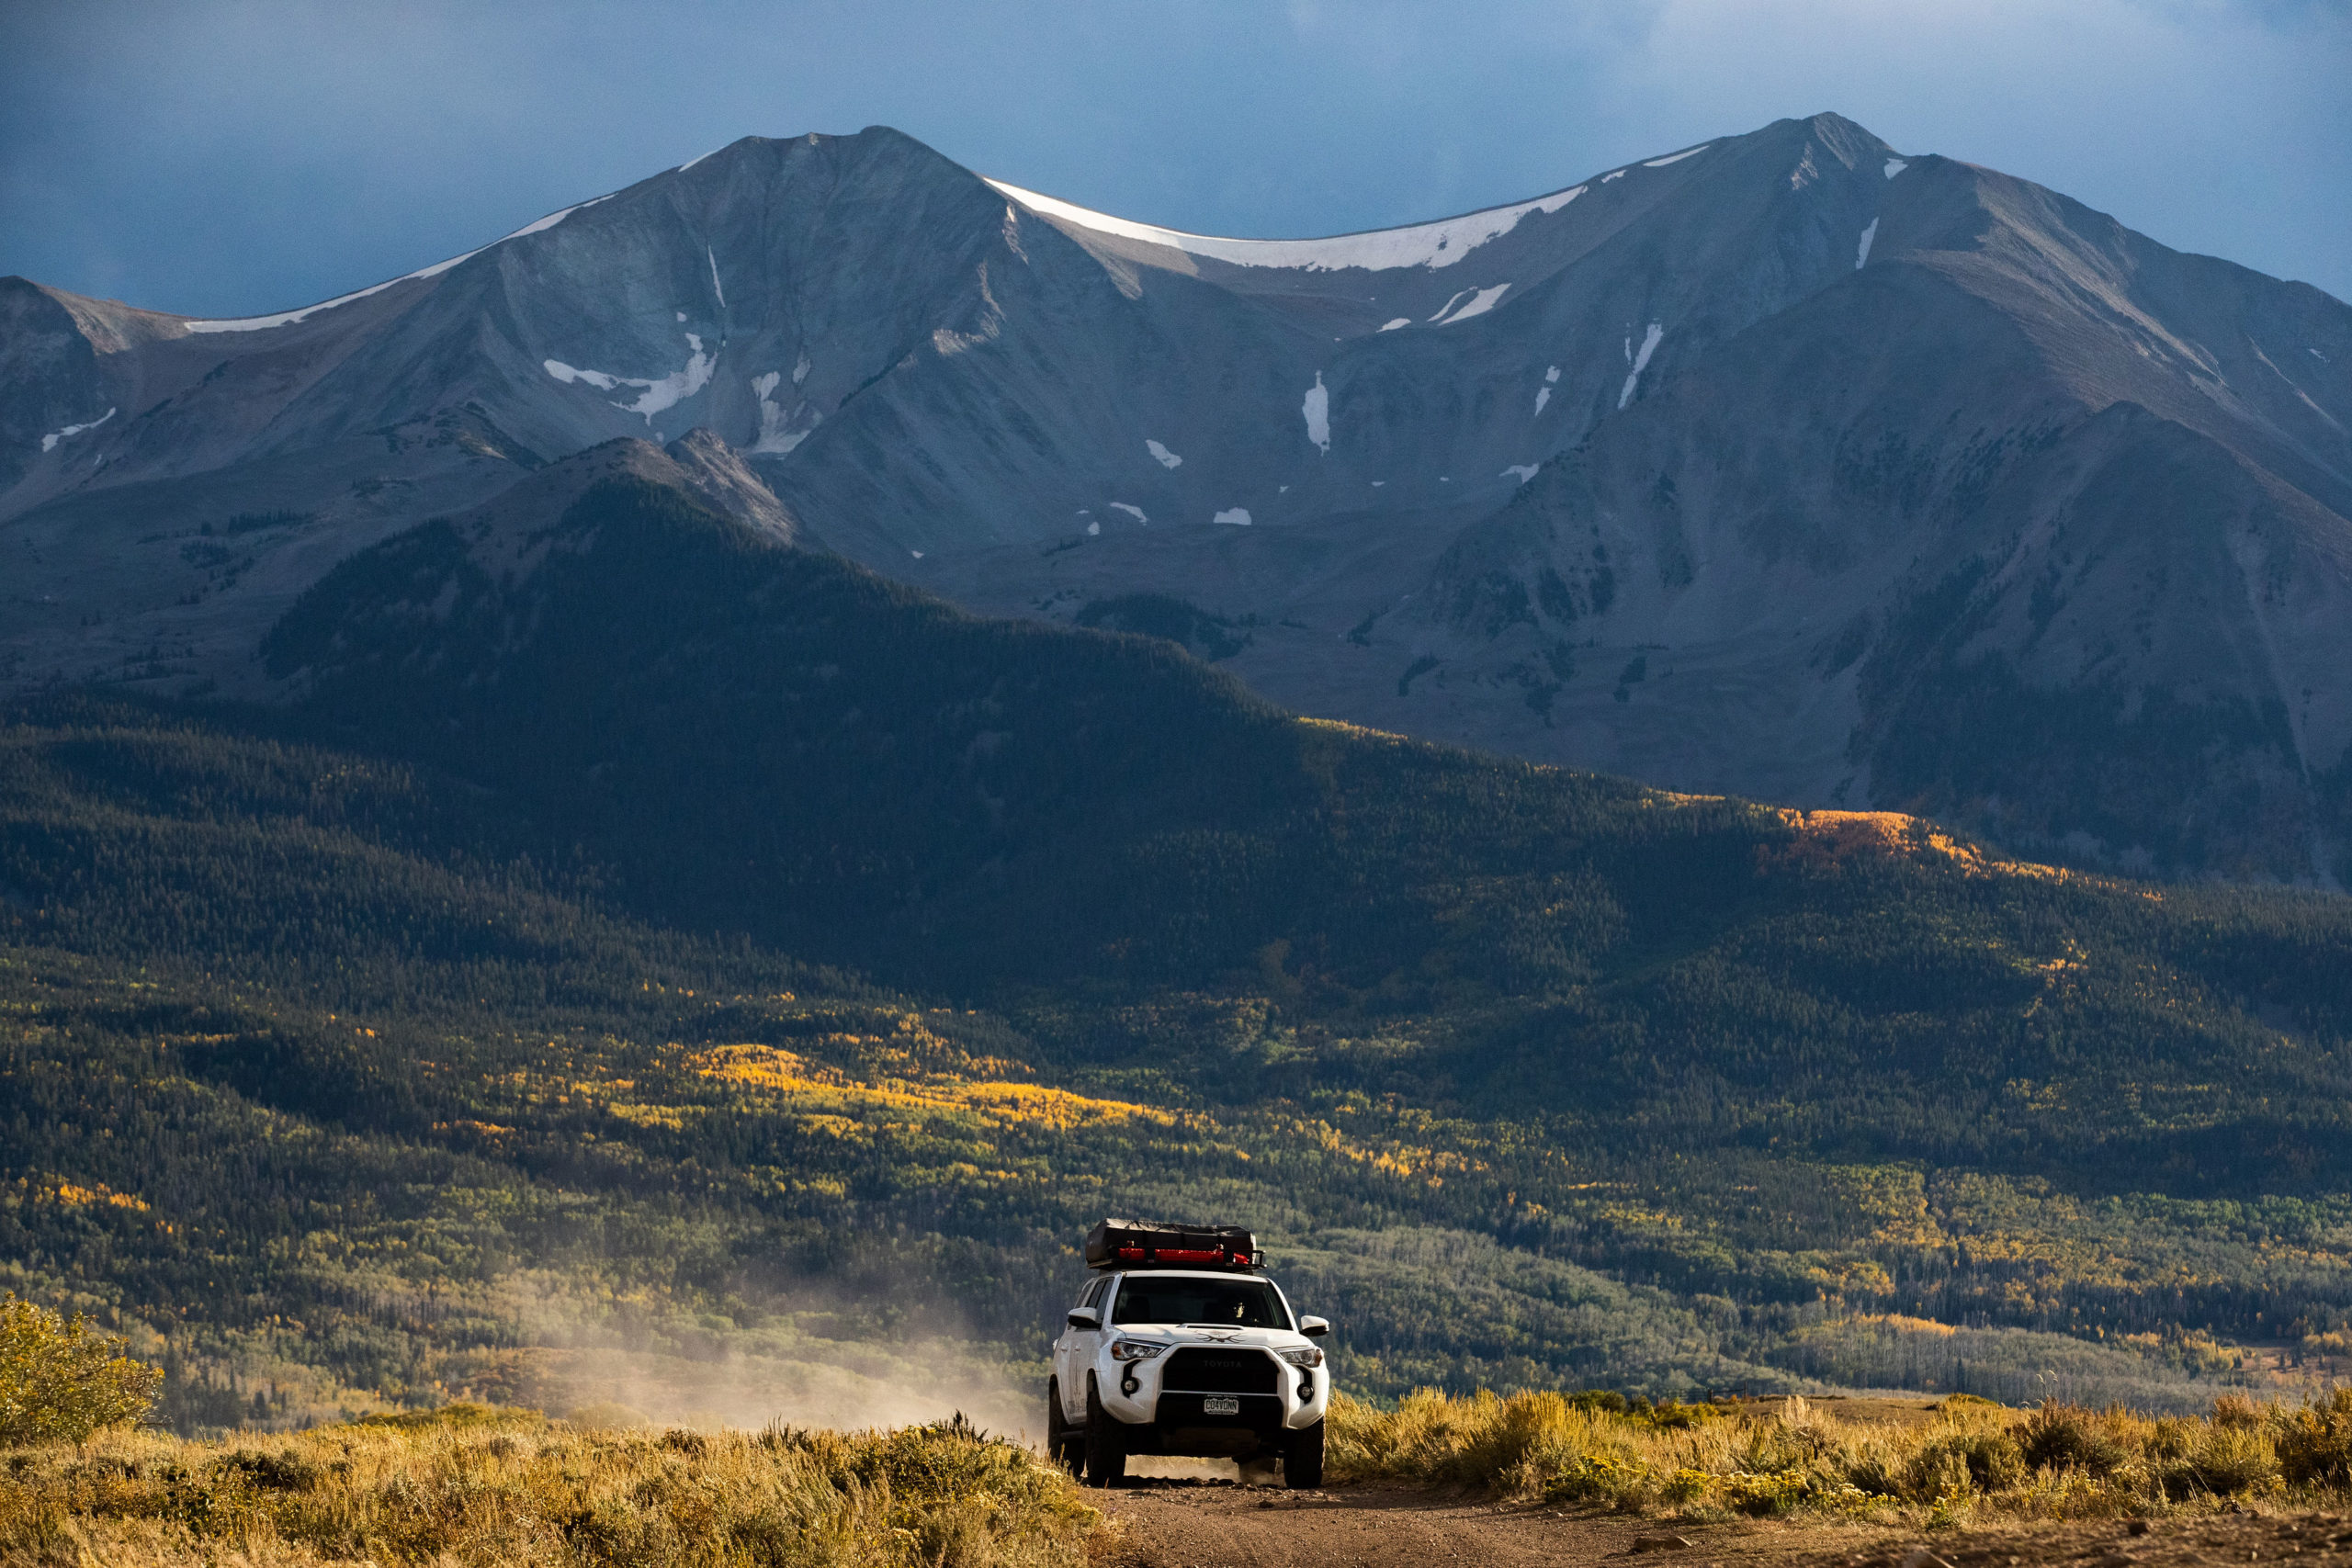 Image of a Colorado Overlander Toyota 4Runner TRD Pro driving on a dirt road. There is an epic mountain view in the background.